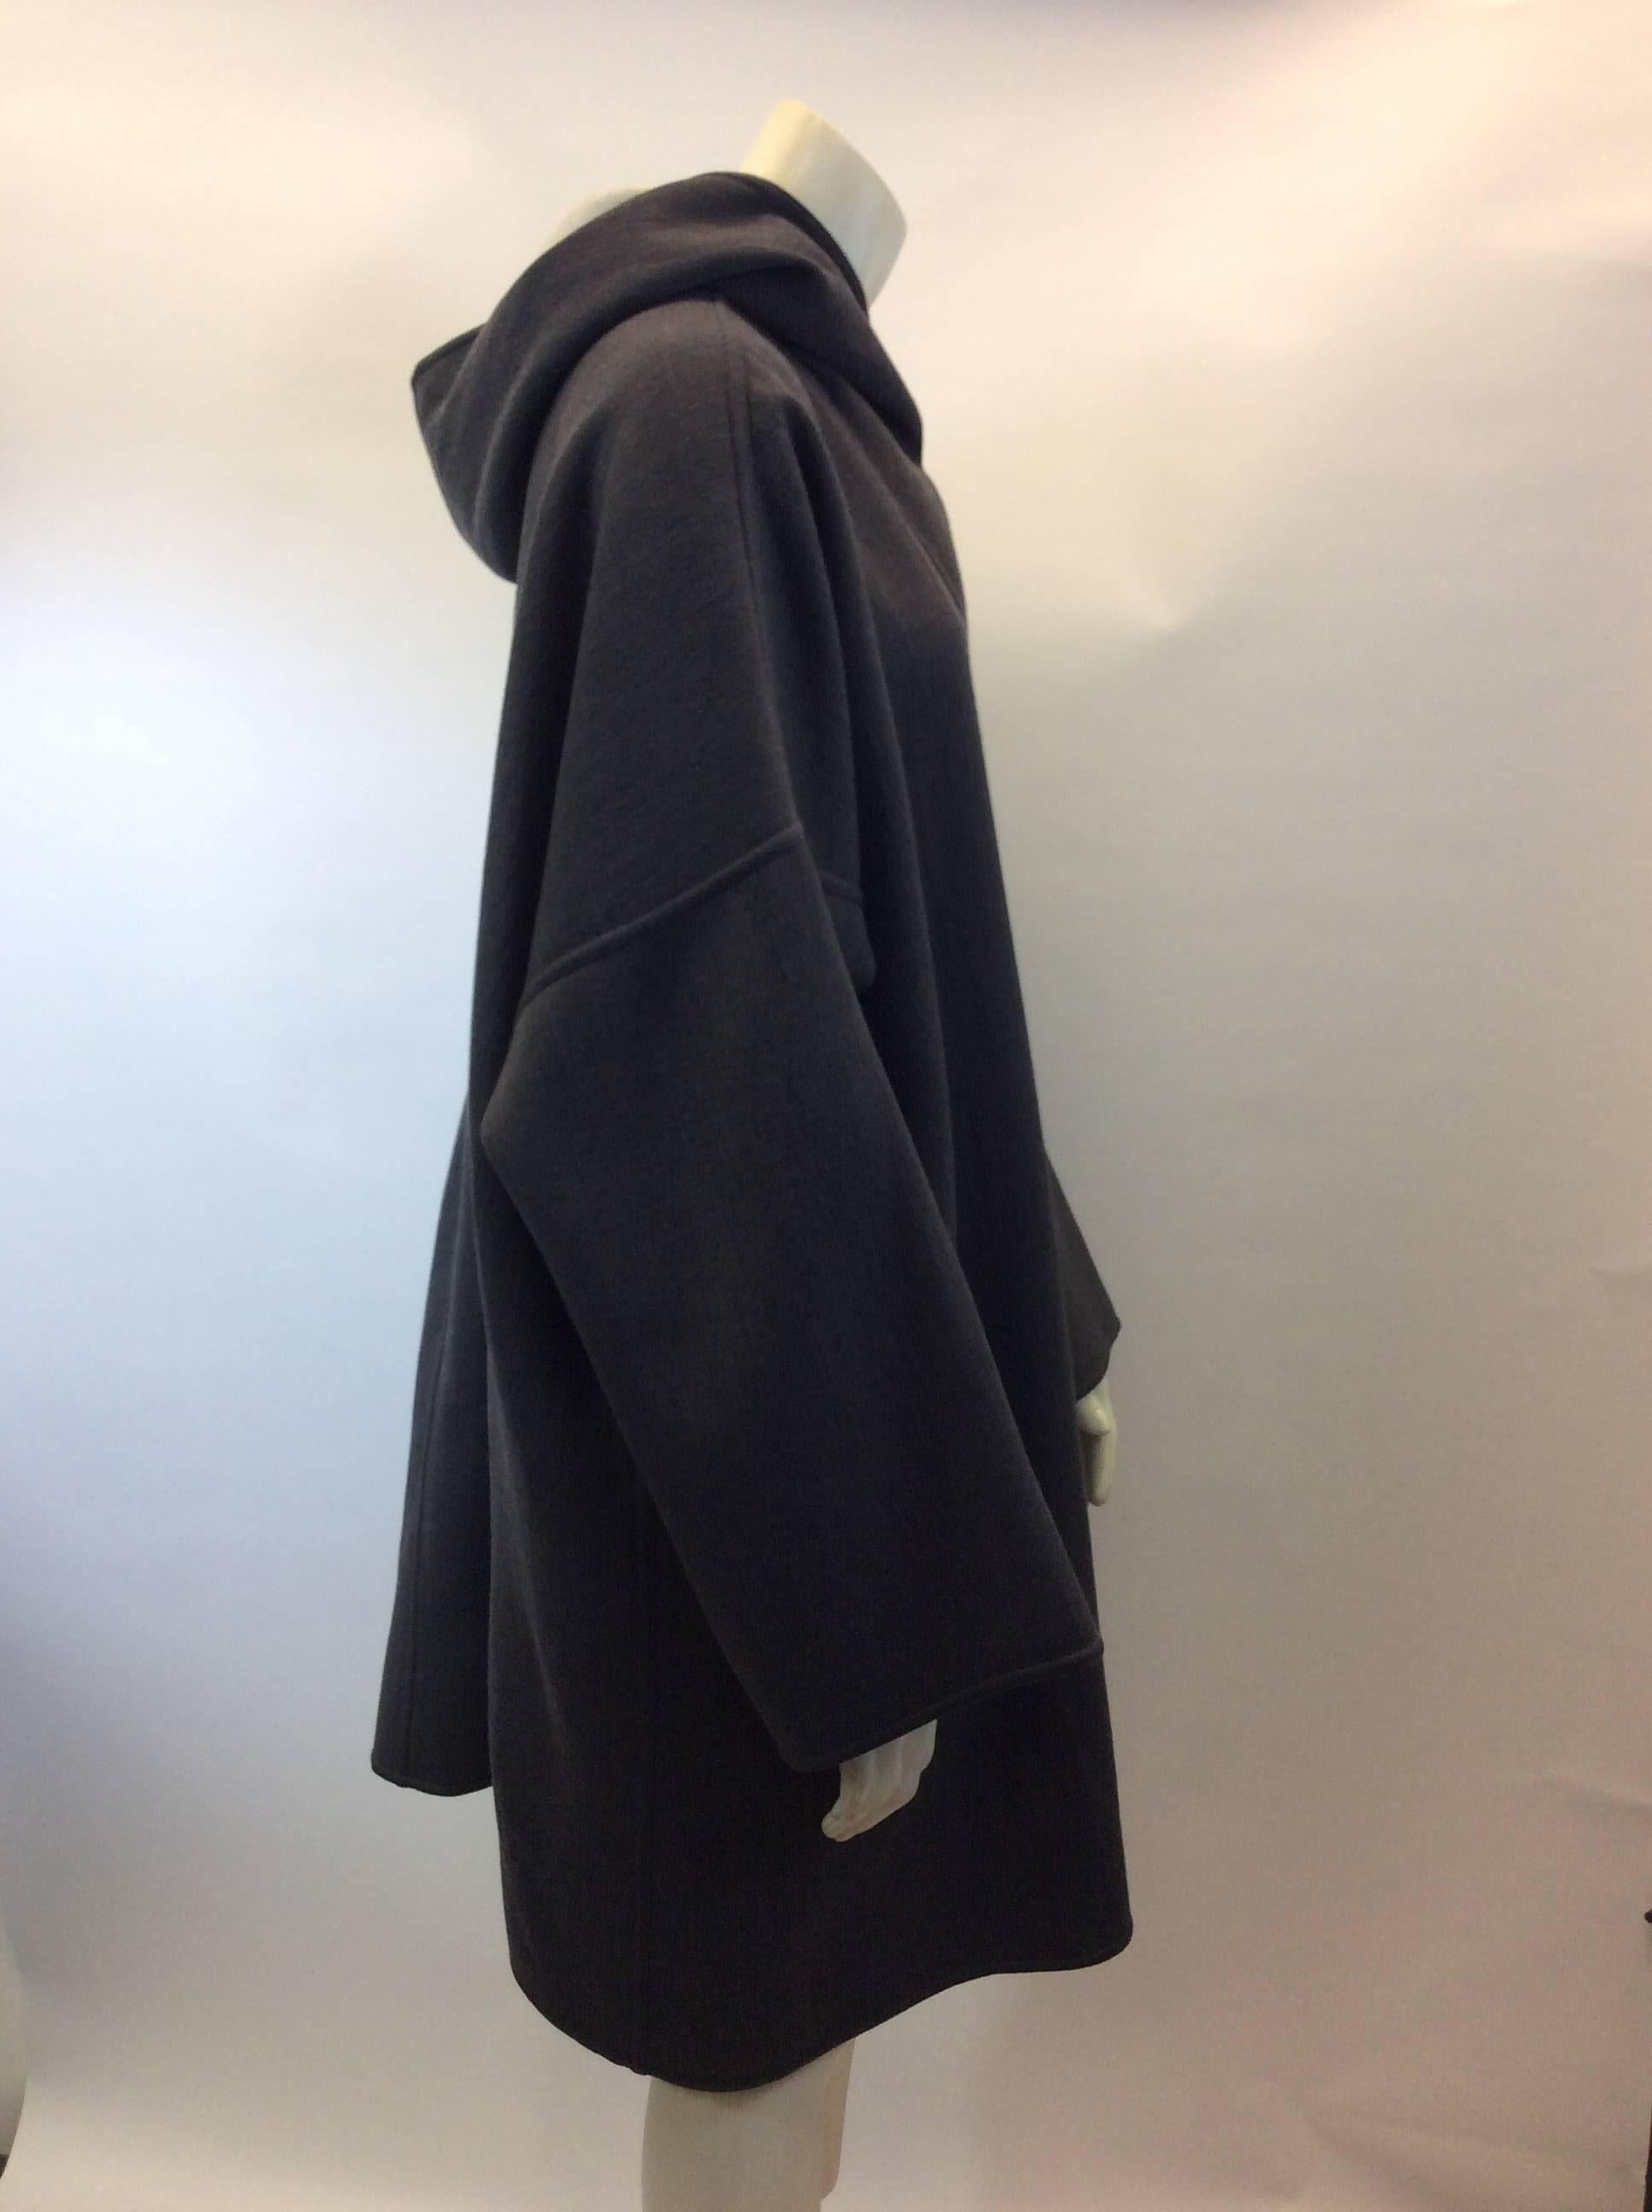 Giorgio Armani Oversize Hooded Topcoat
$499
Made in Italy
Wool
3 large buttons and one around the neck 
2 front pockets
